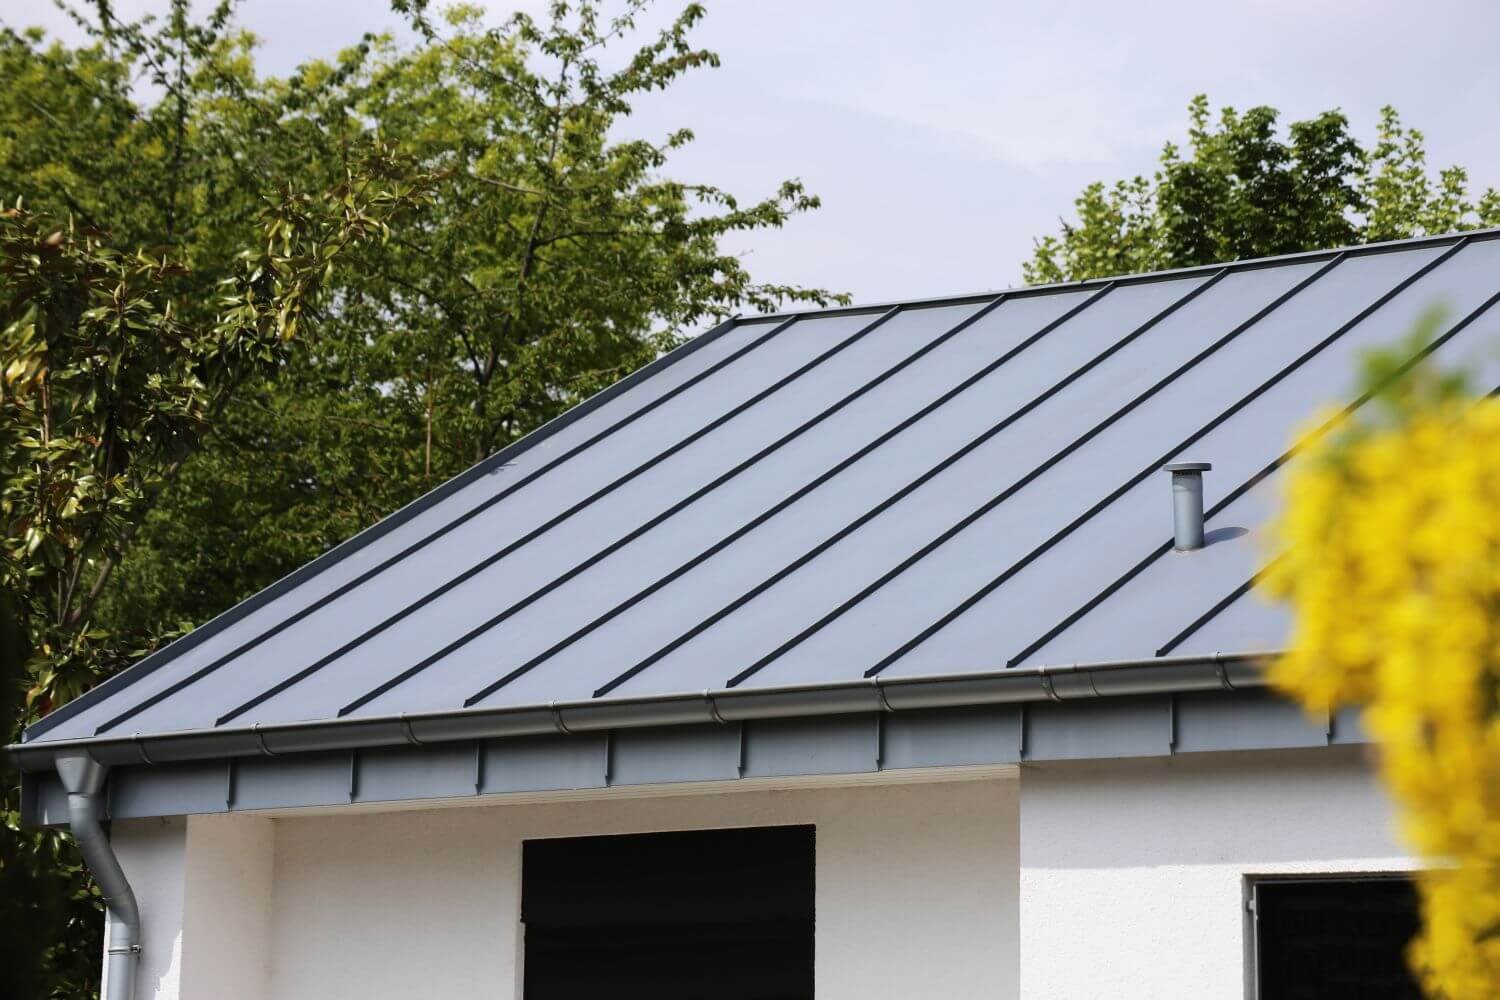 Roofers Who Install Metal Roofs In Redmond Or